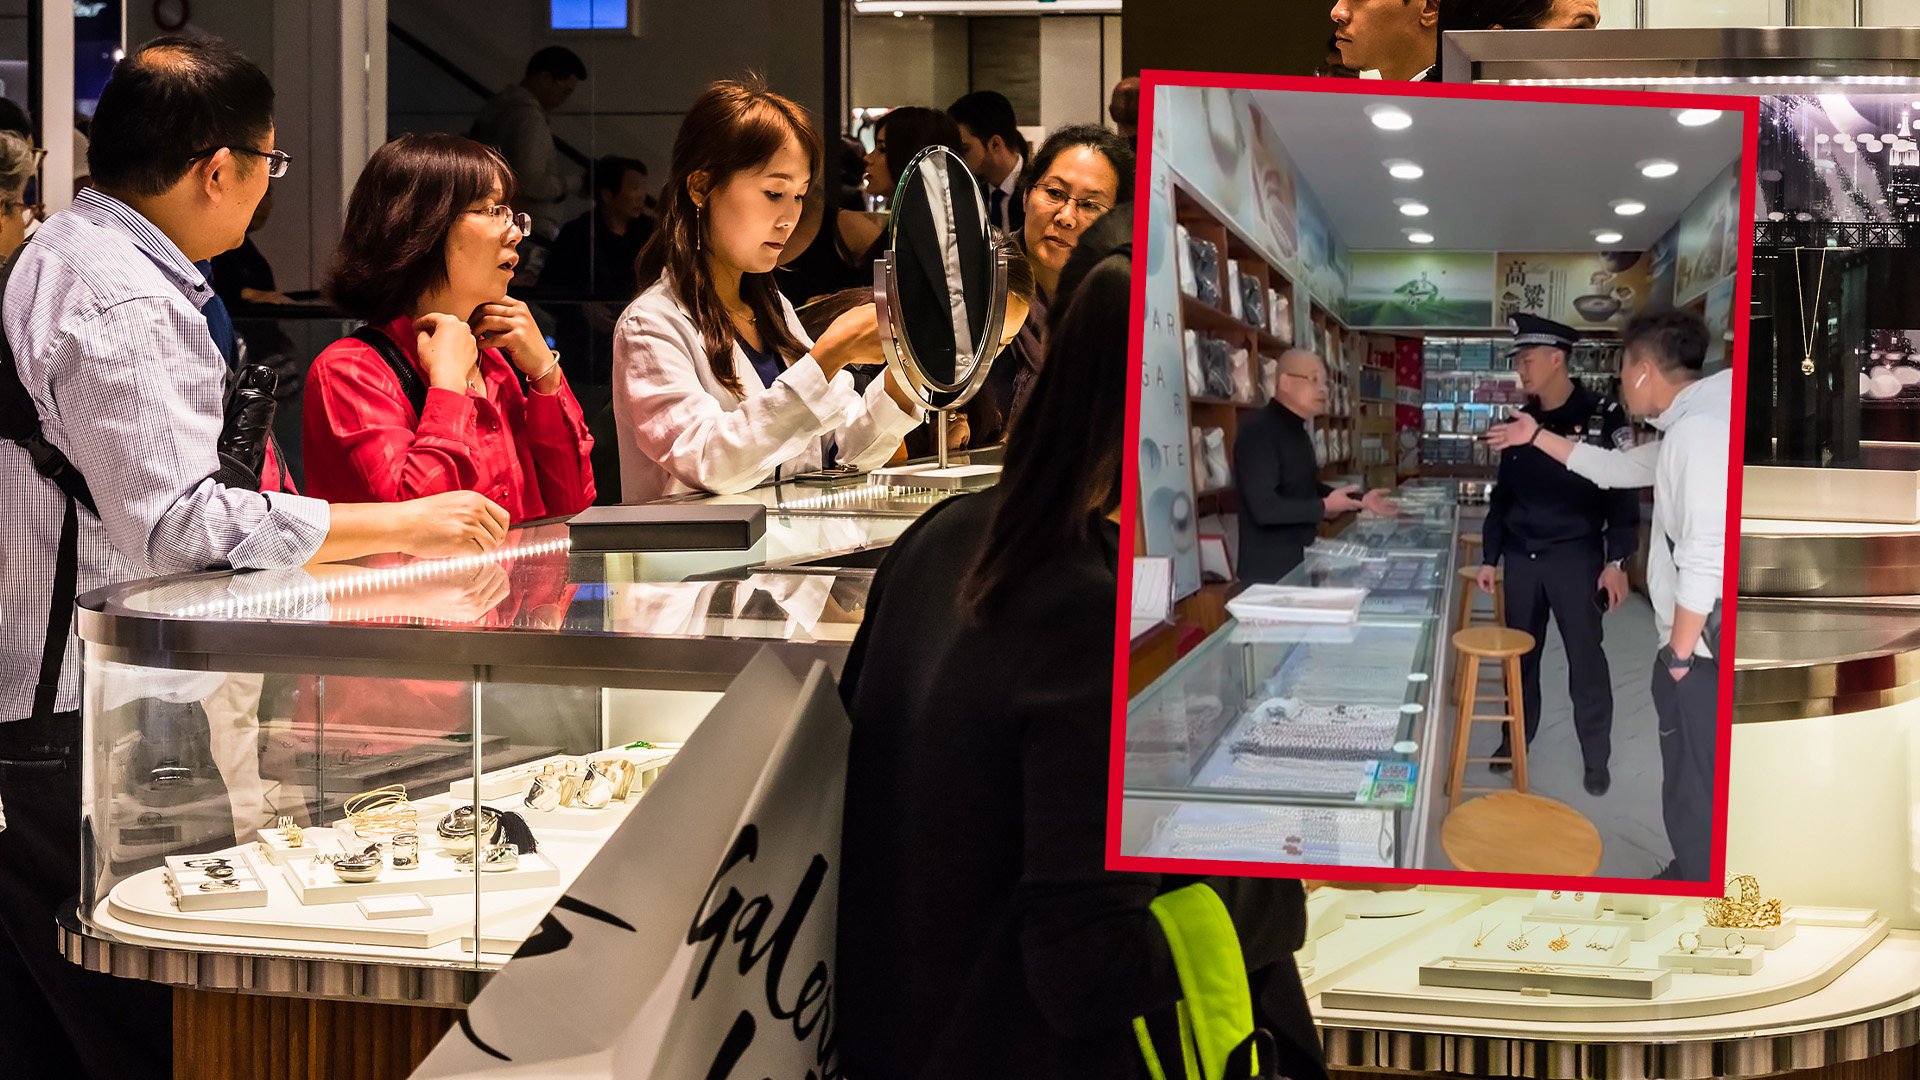 A woman tourist in China who was mocked by a shop owner because she asked what his prices were but did not buy anything, called in the police who ordered the temporary closure of the business. Photo: SCMP composite/Shutterstock/Douyin